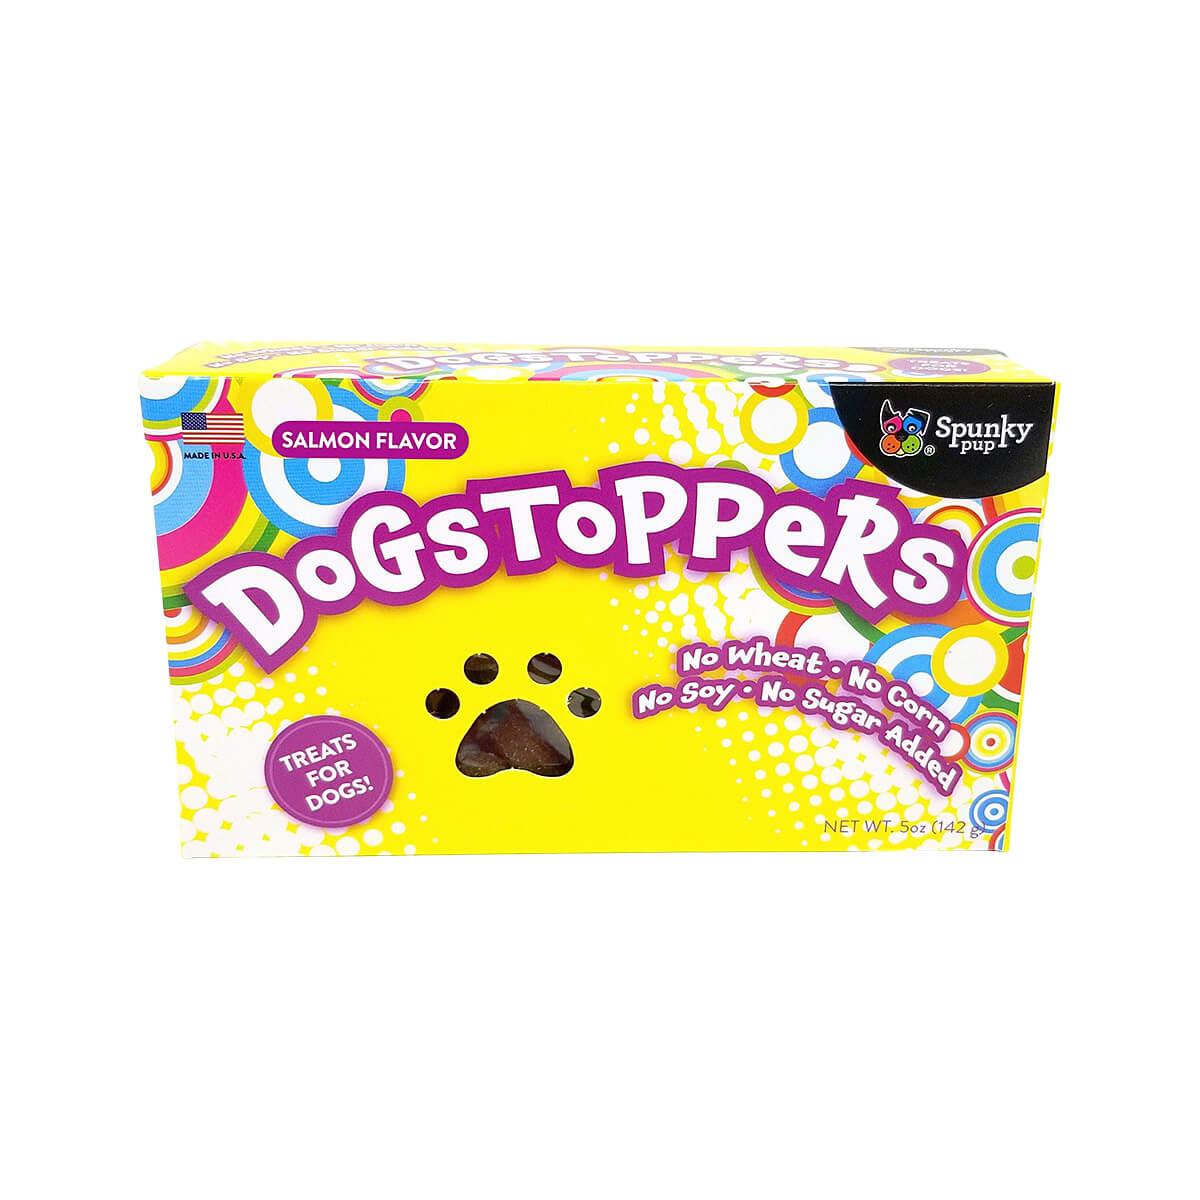  Dogstoppers Salmon Treats